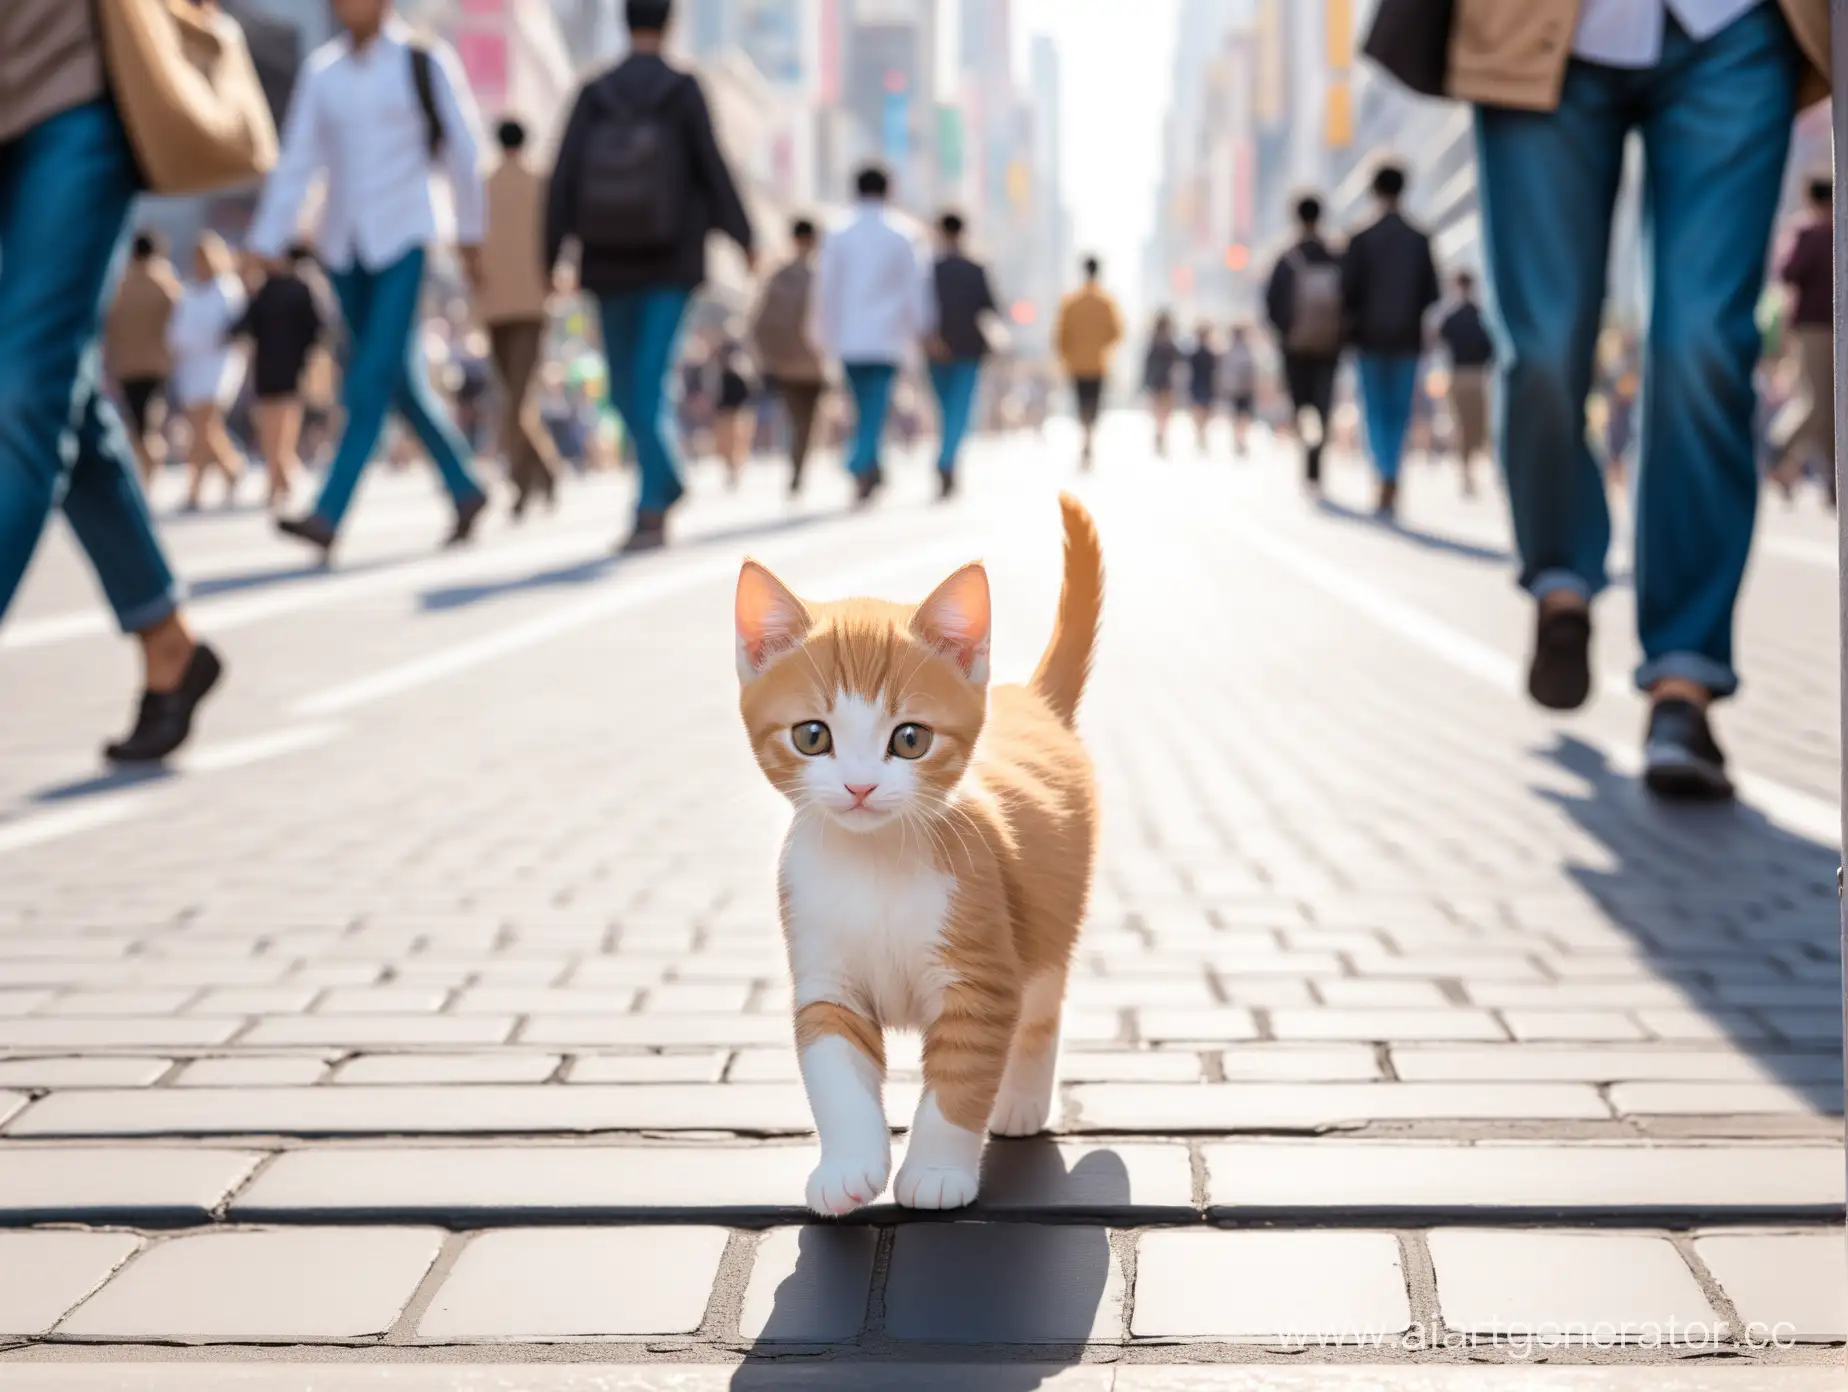     A lonely kitten wandering down a bustling city street, surrounded by busy pedestrians